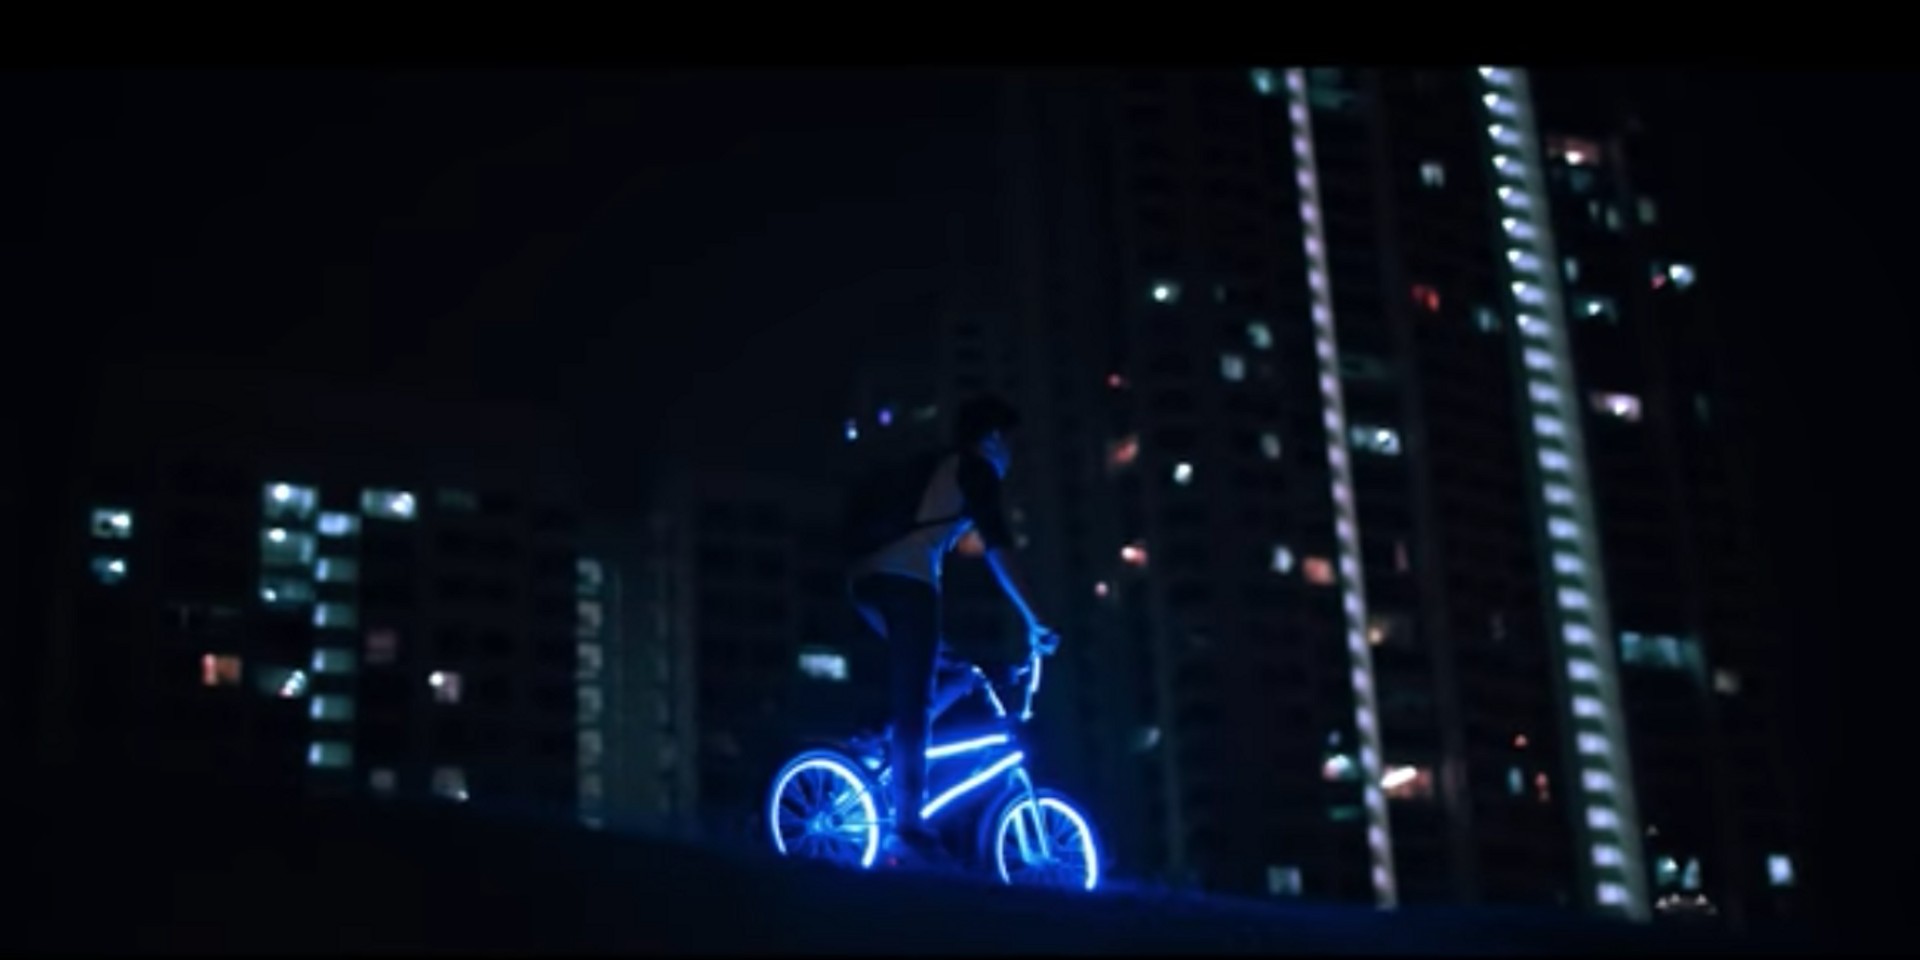 These Brittle Bones captures Singapore's nighttime beauty in music video for 'Healing' – watch